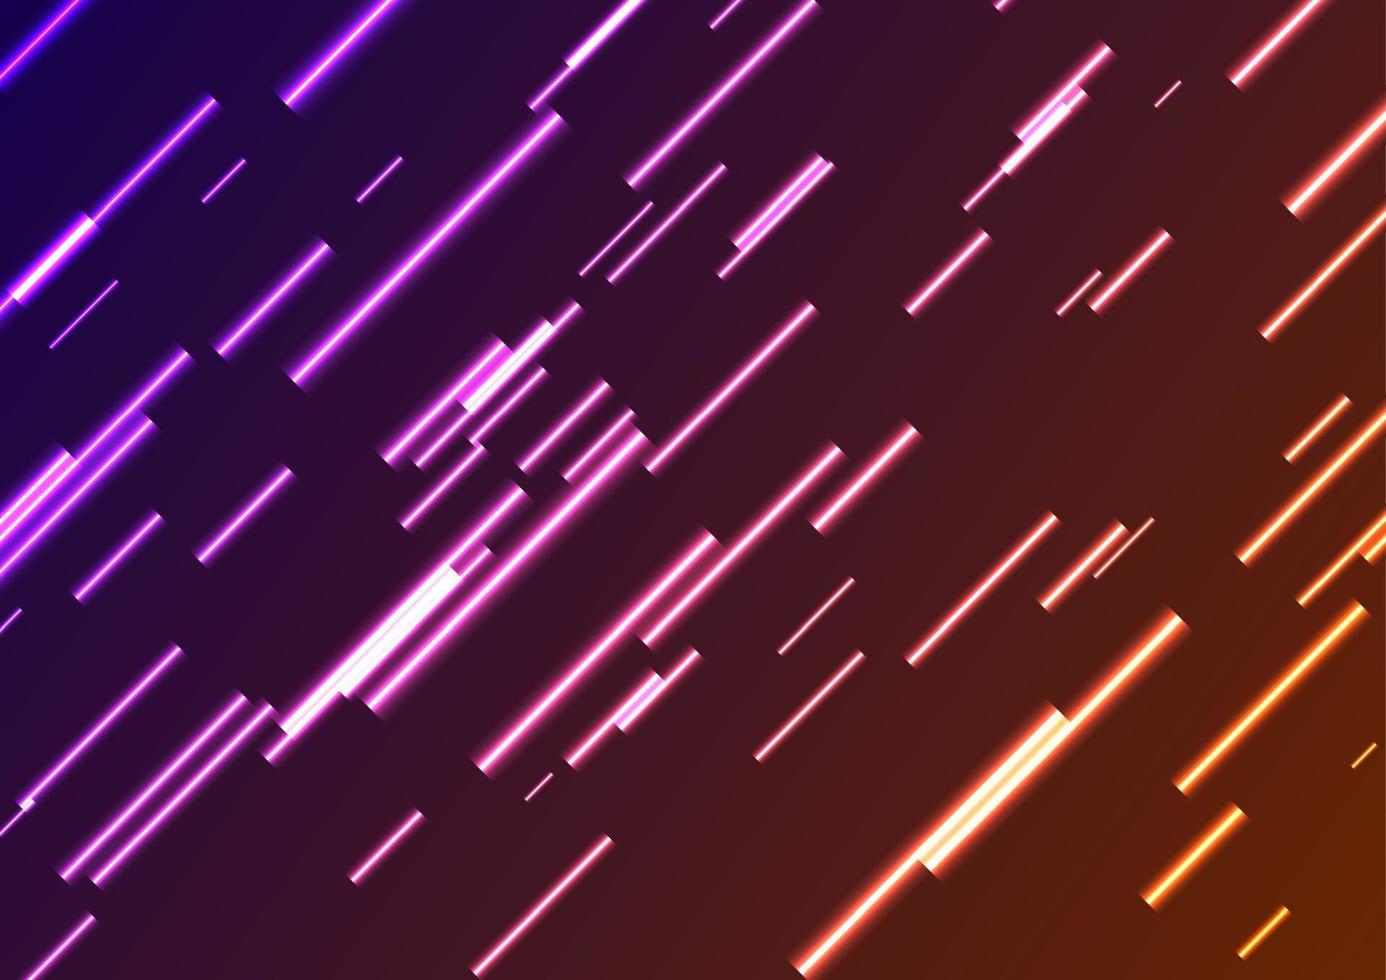 Glowing sci-fi retro background with neon laser rays vector